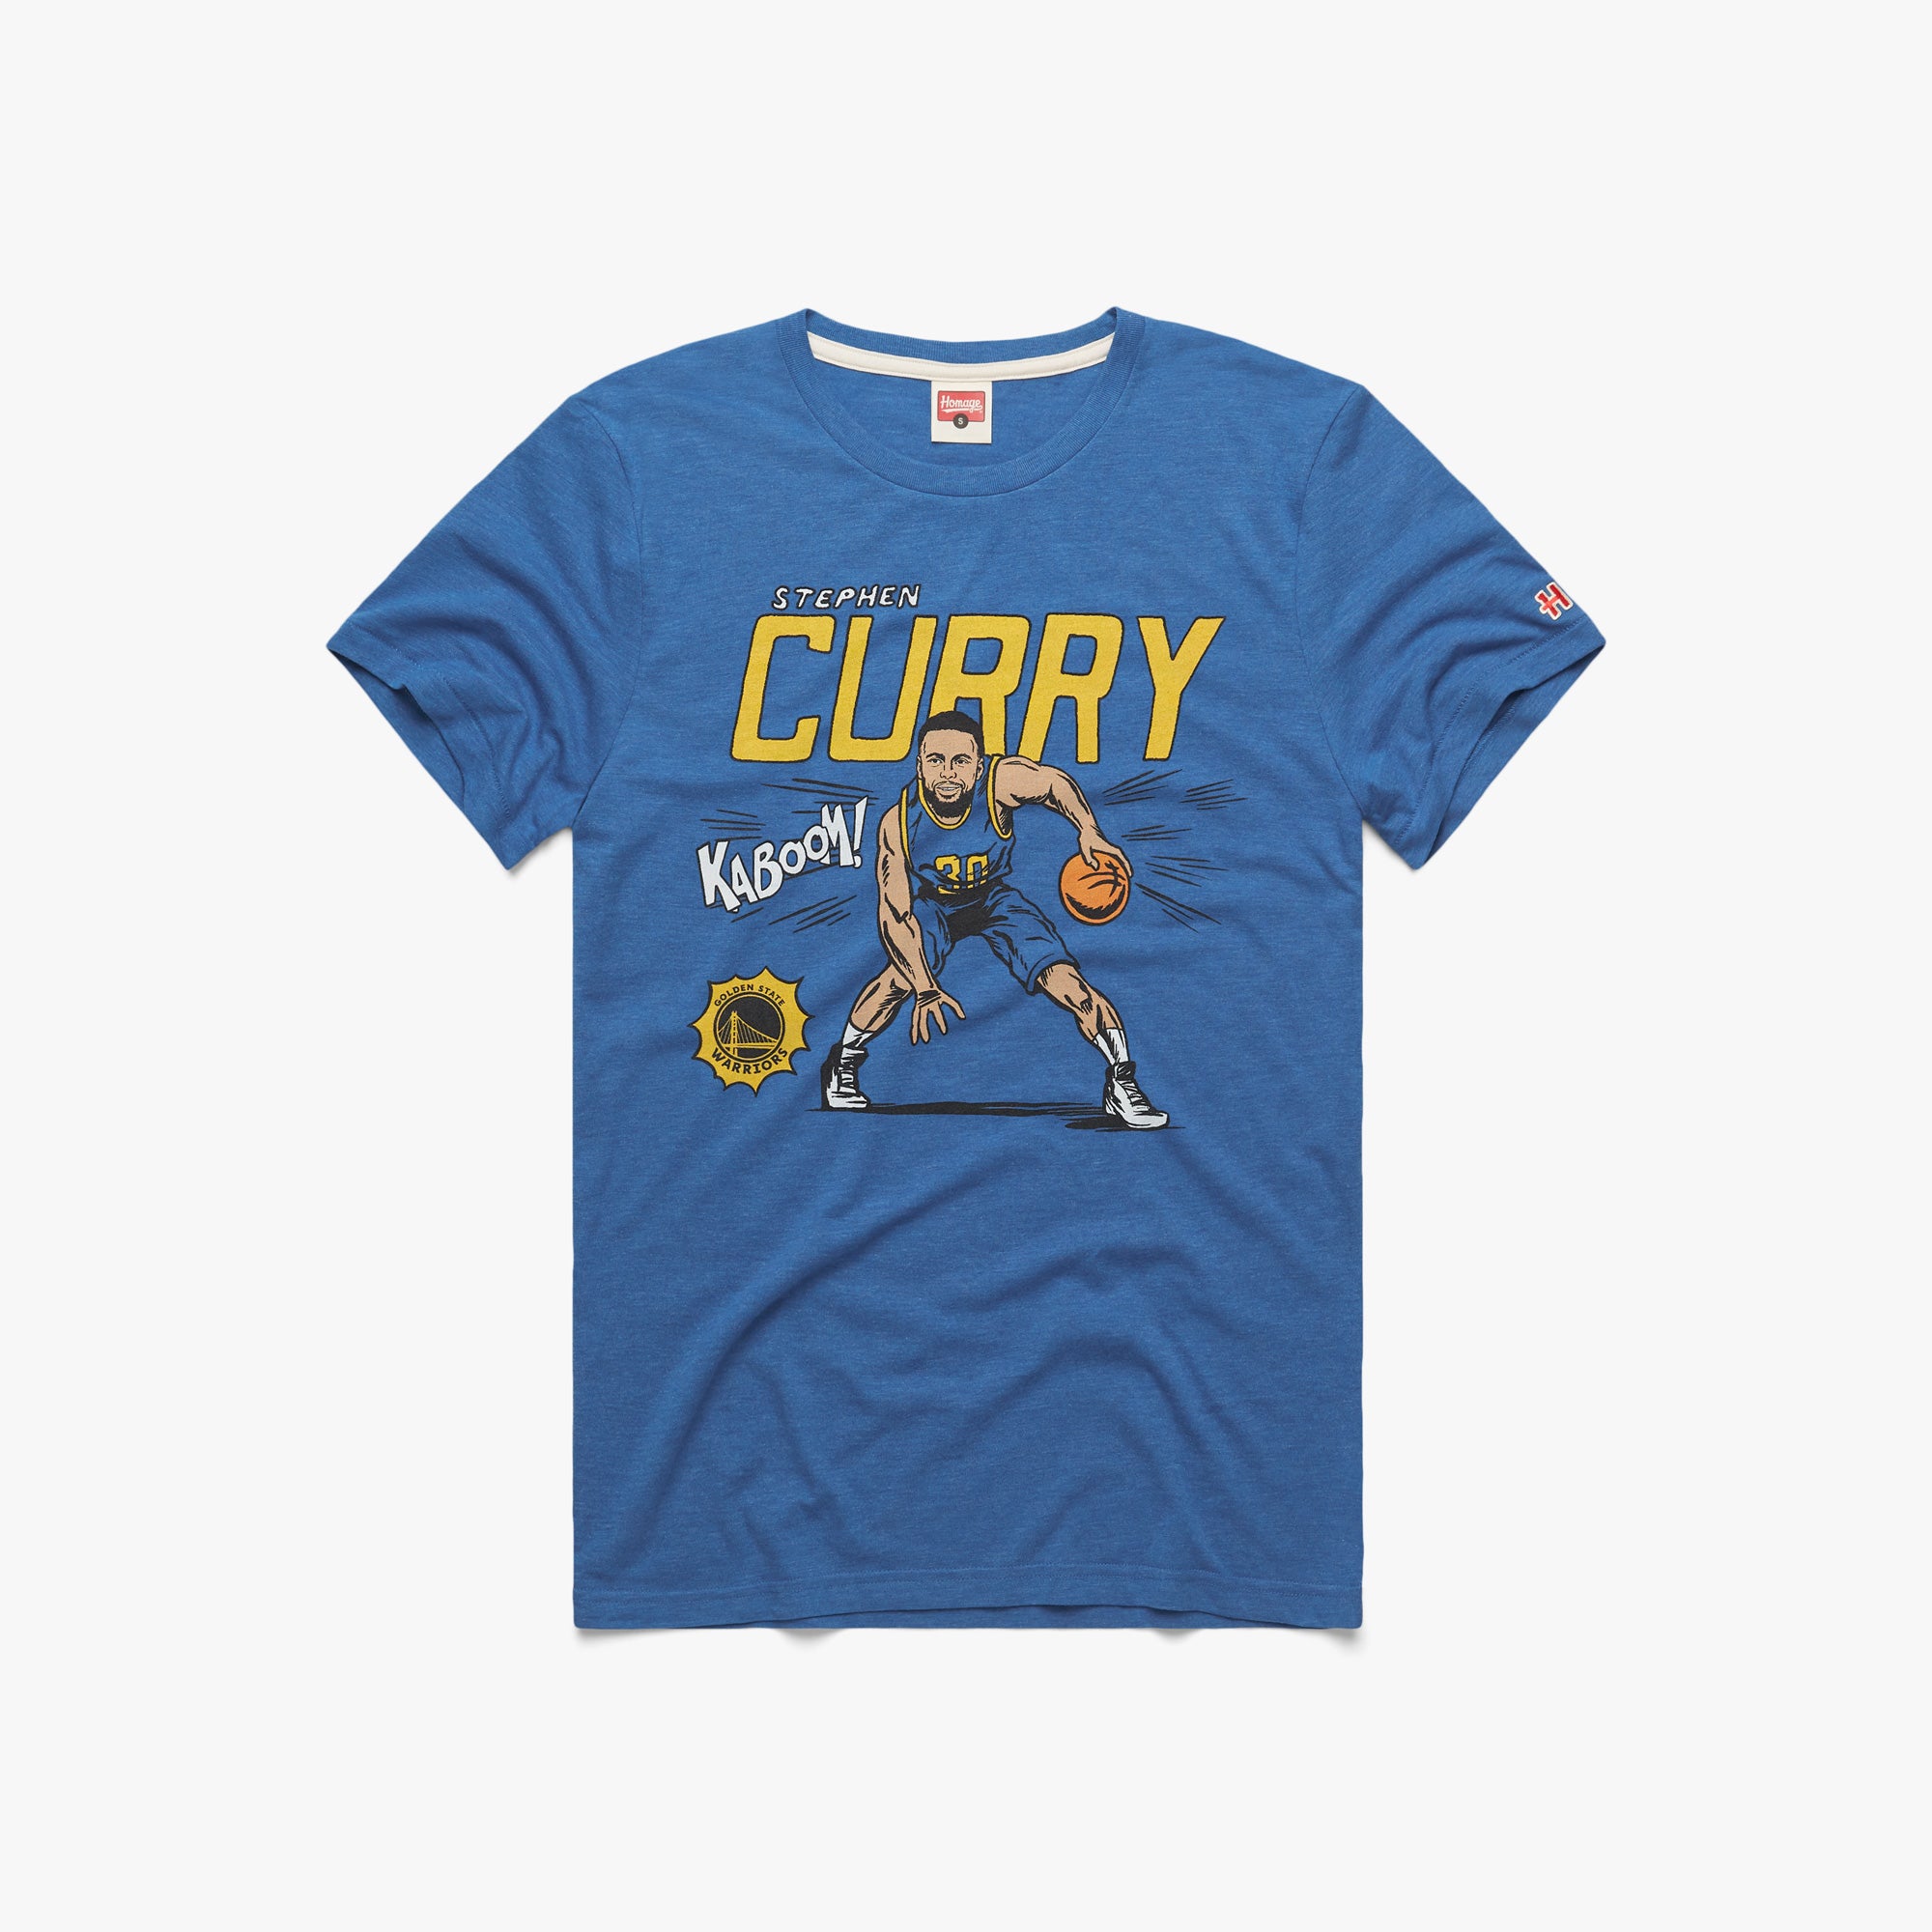 Golden State Warriors Comic Book Stephen Curry